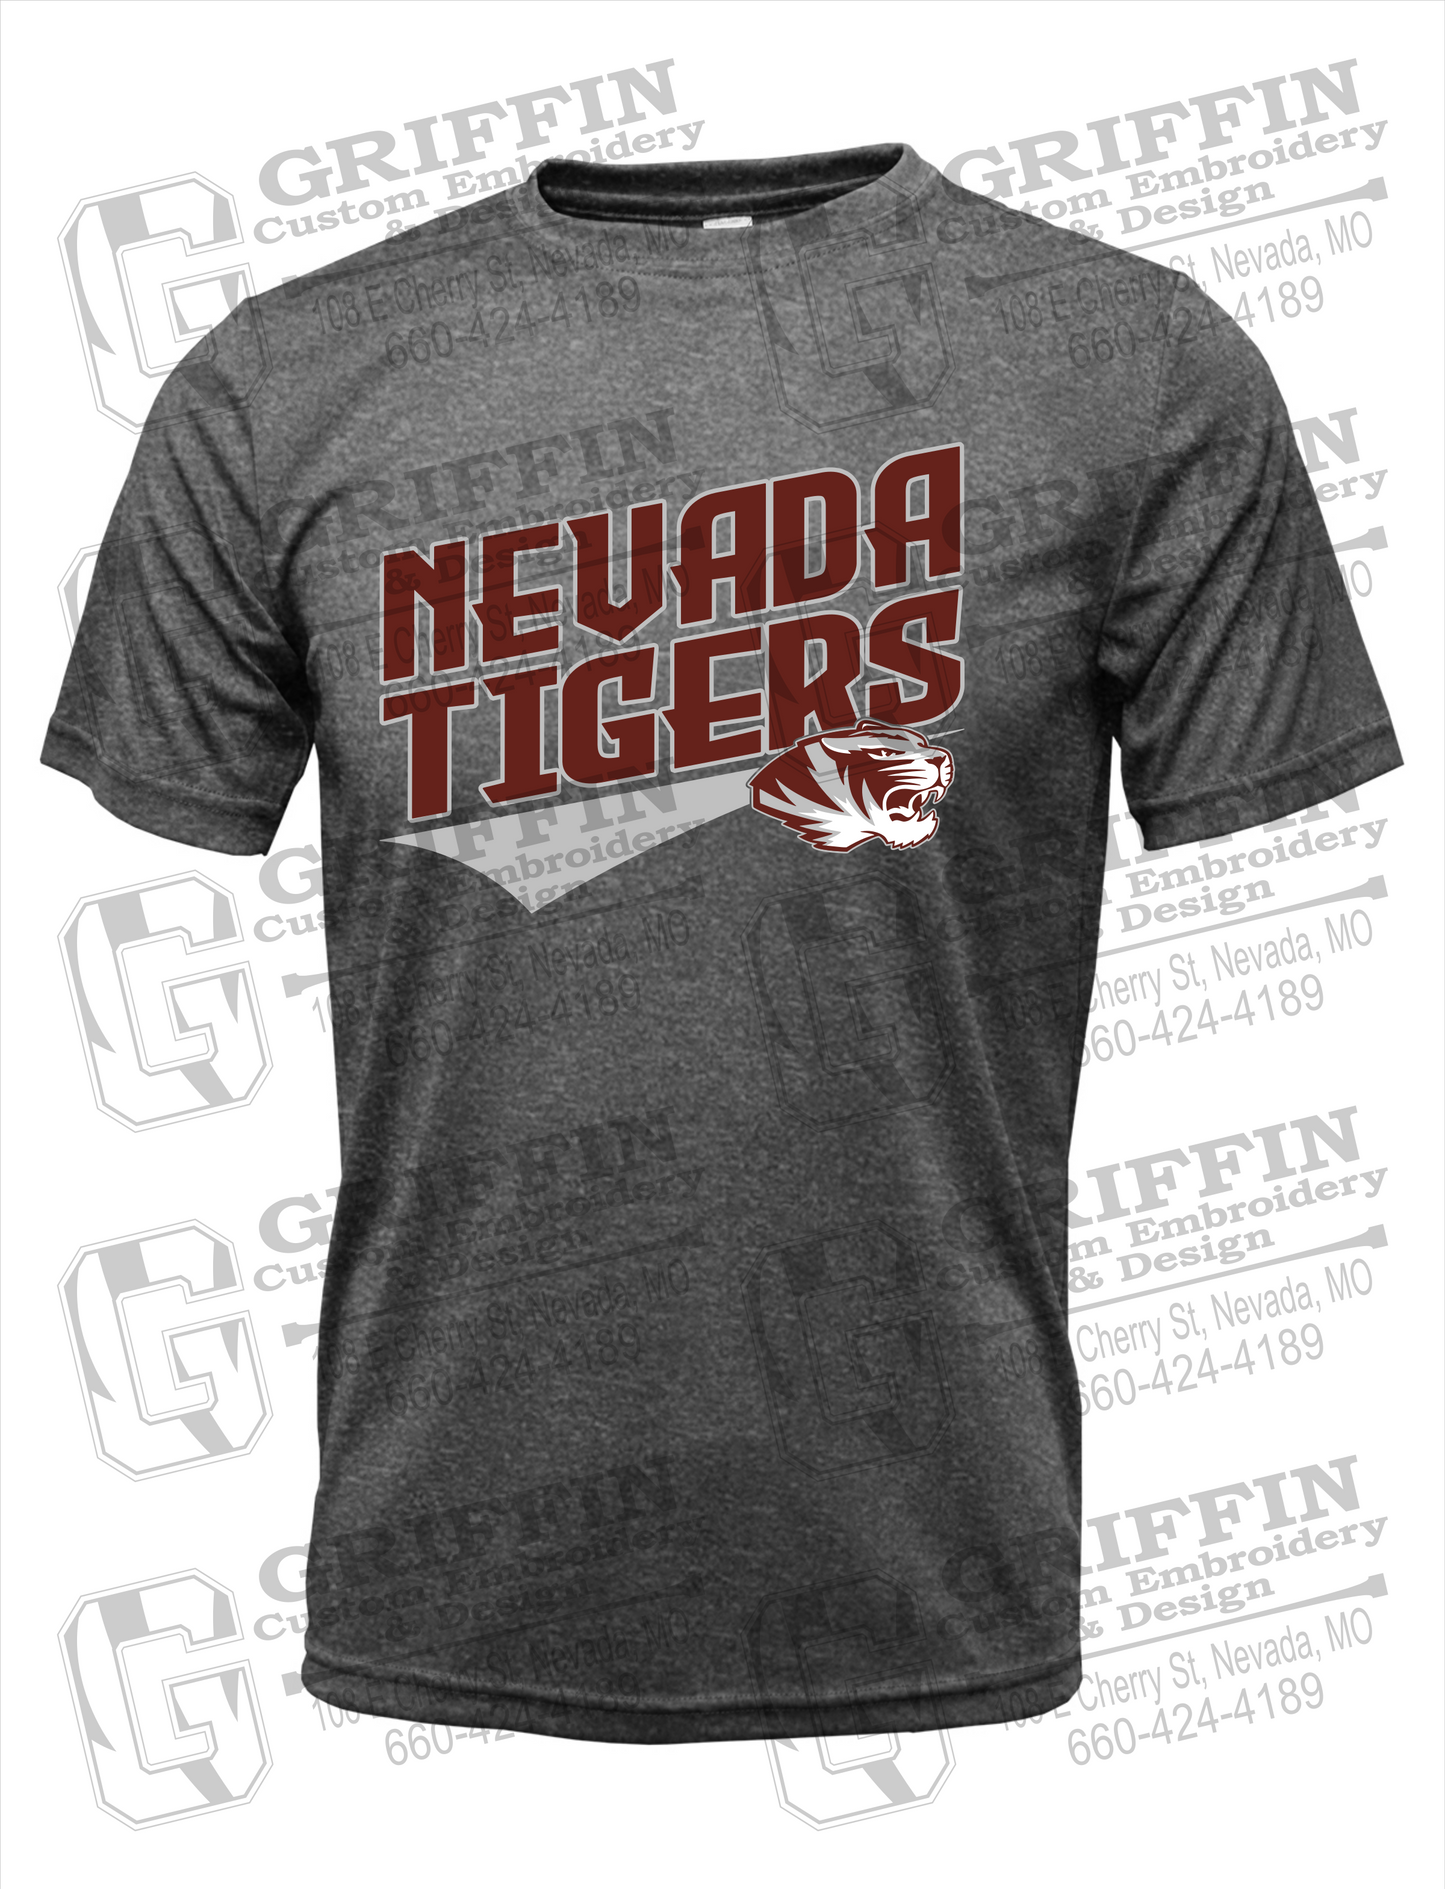 Nevada Tigers 21-E Dry-Fit T-Shirt